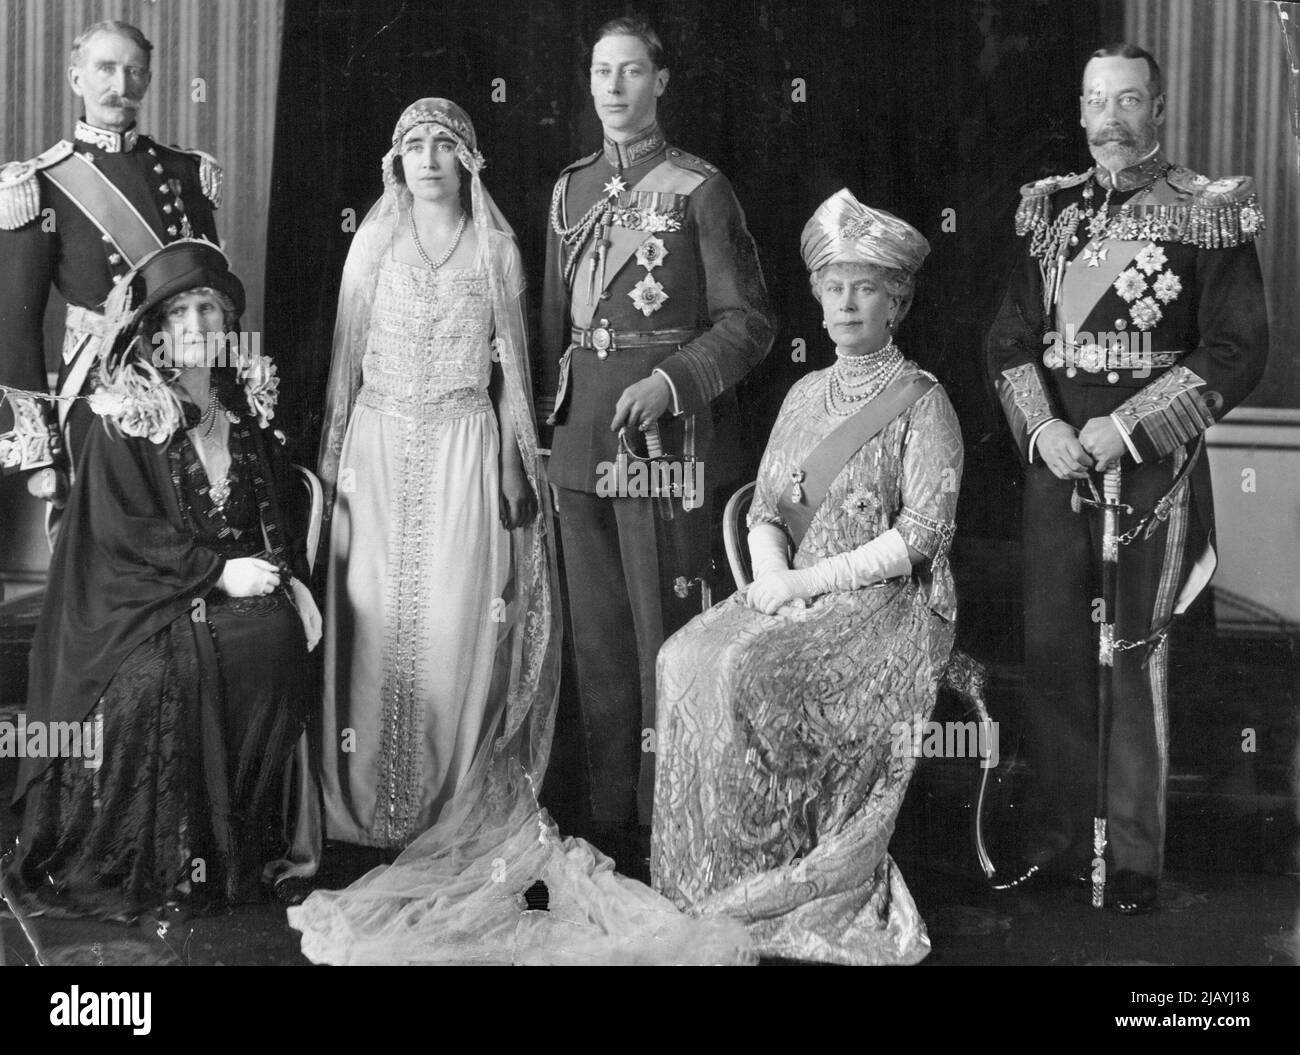 The Queen Mother, formerly Lady Elizabeth Bowes-Lyon, and the Duke of York - the future King George VI - at their wedding in 1923, seated is Queen Mary with King George V. January 04, 1937. Stock Photo